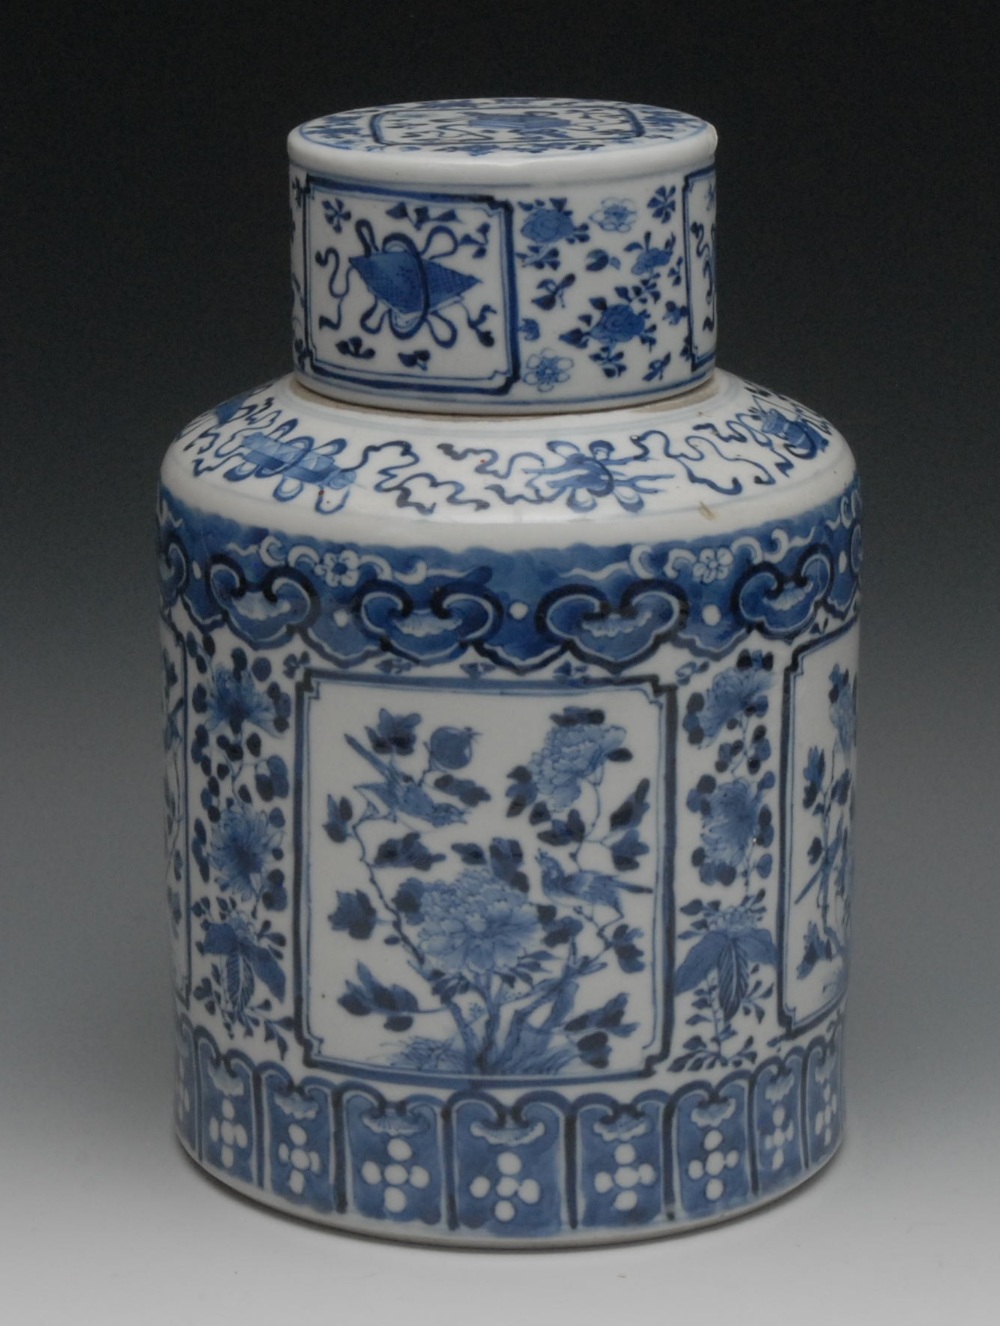 A Chinese porcelain cylindrical jar and cover, painted in underglaze blue with birds, flowers and